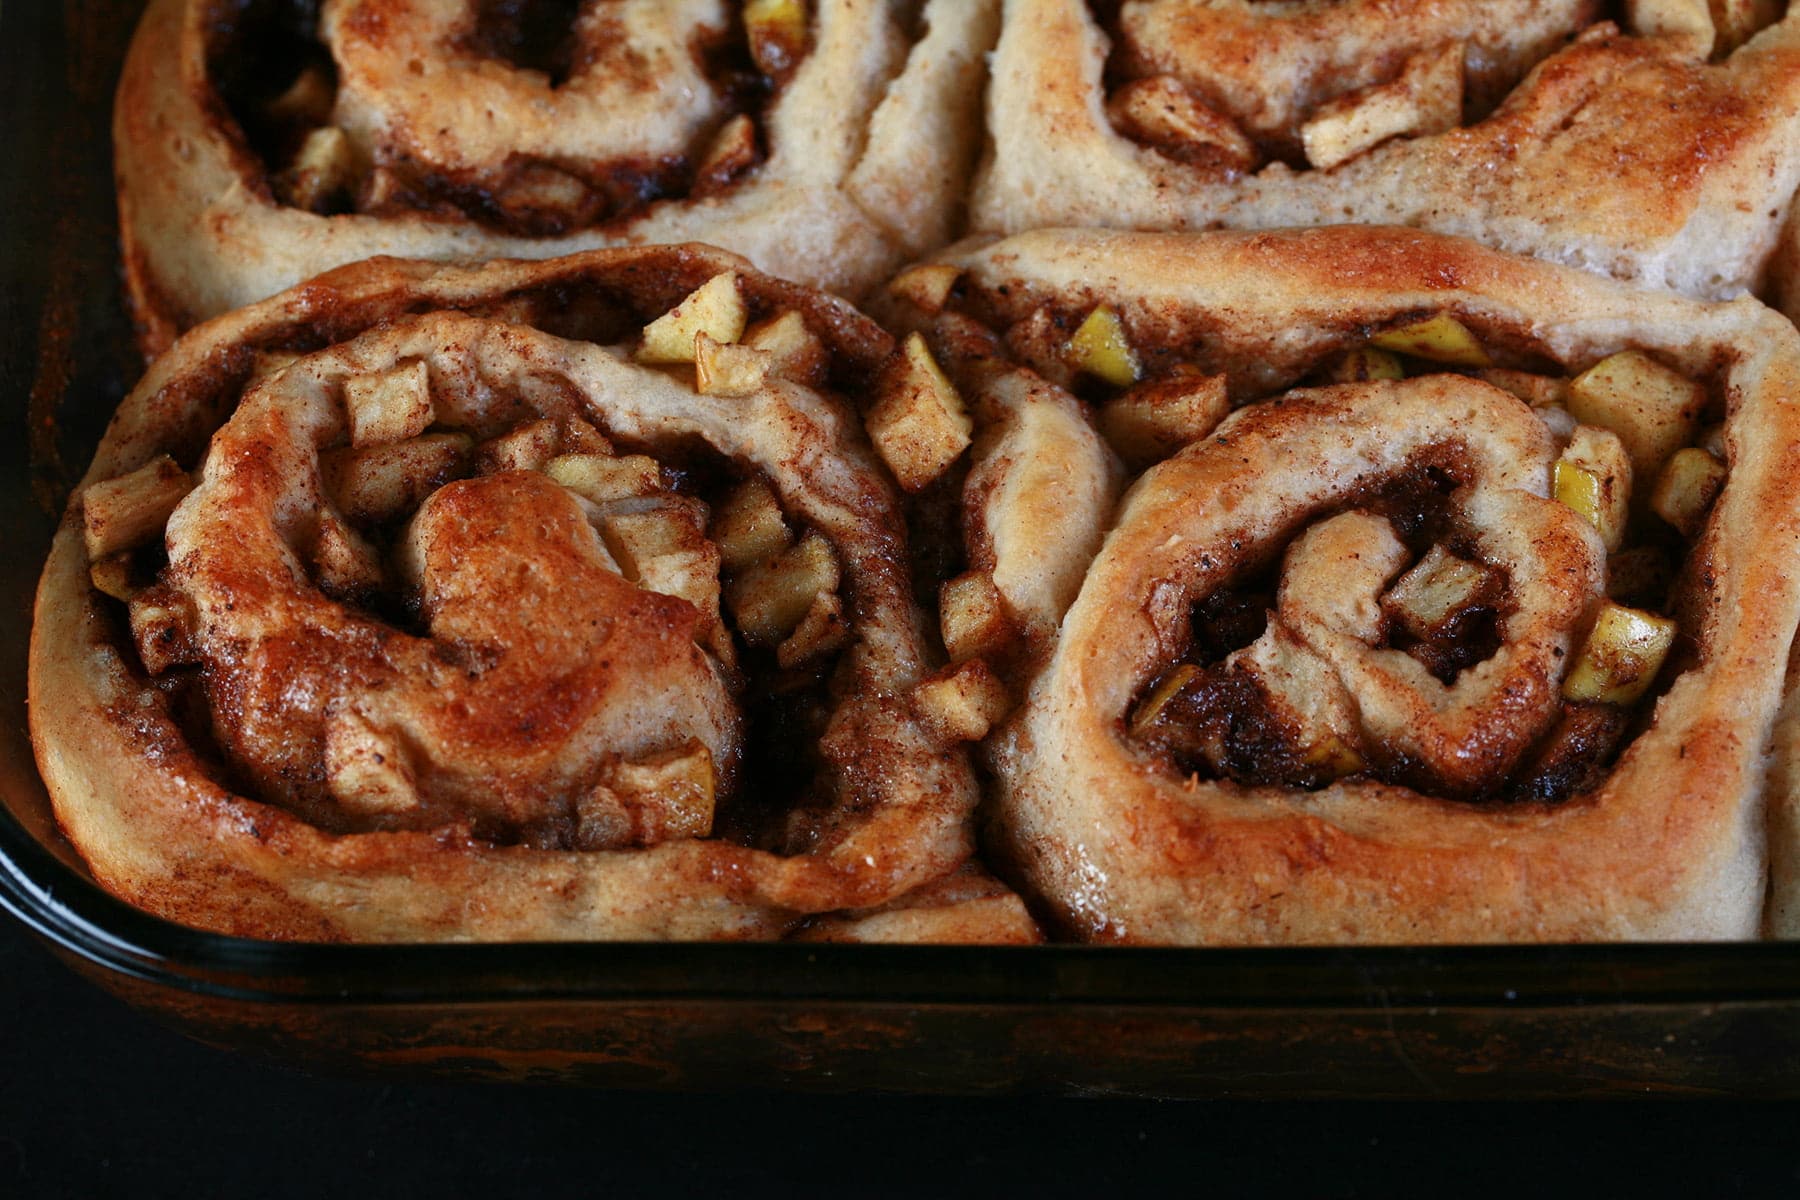 Close up photo of a pan of apple cinnamon rolls - cinnamon buns, but with small pieces of apple throughout the cinnamon swirl.